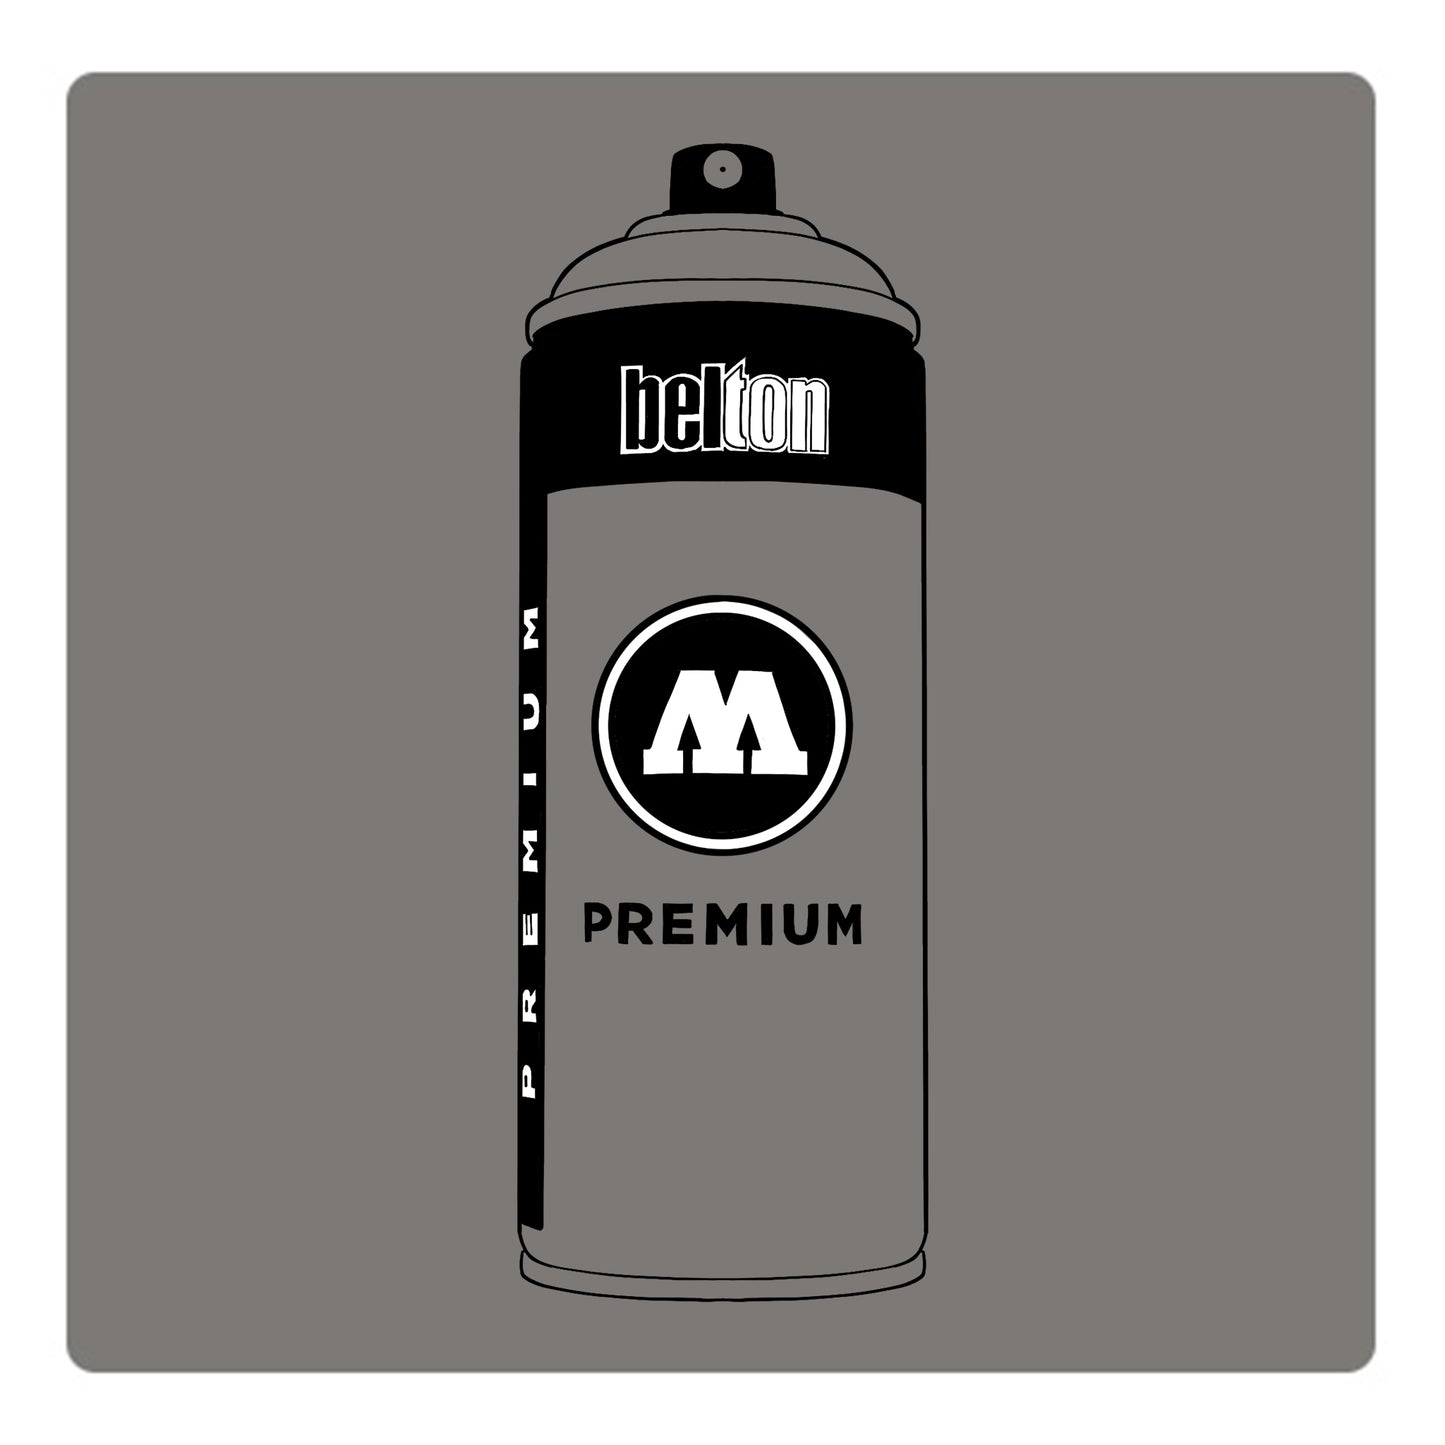 A black outline drawing of a mid grey spray paint can with the words "belton","premium" and the letter"M" written on the face in black and white font. The background is a color swatch of the same mid grey with a white border